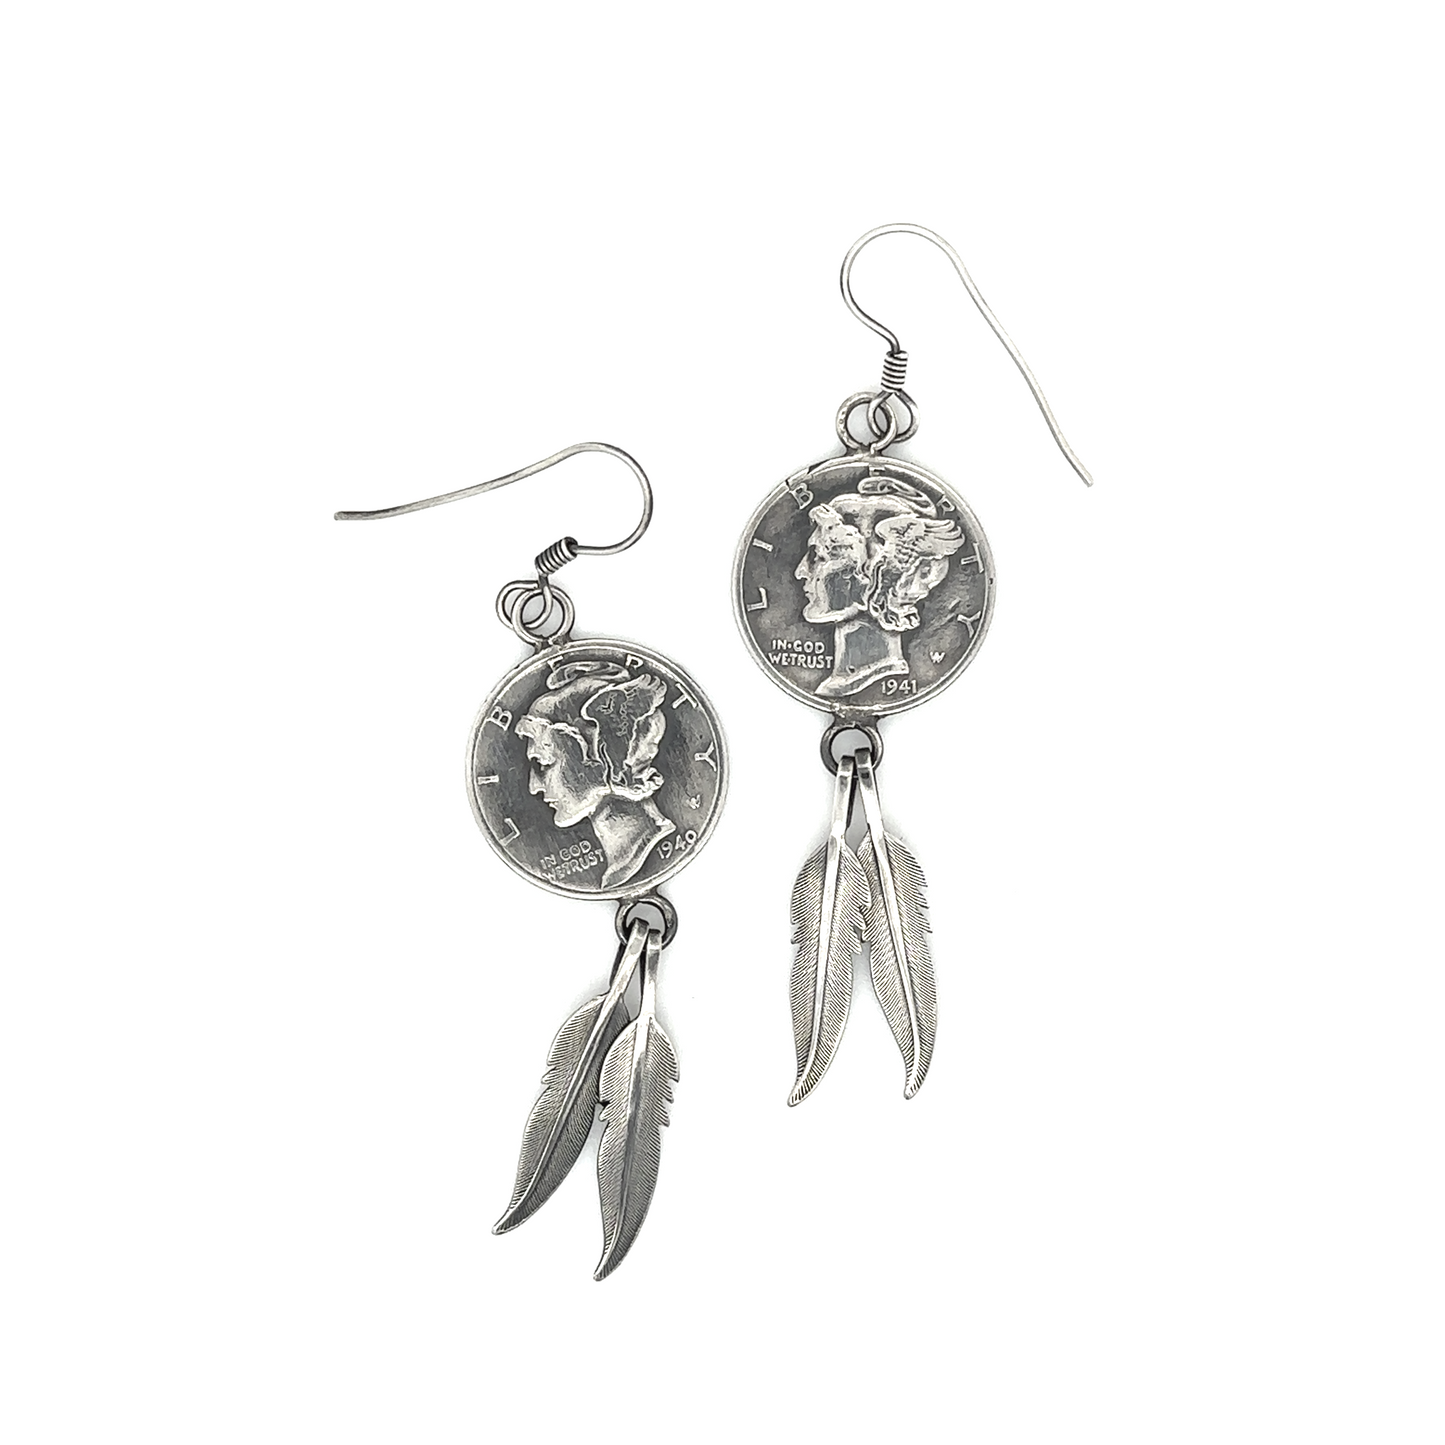 
                  
                    These Native American Mercury Dime Earrings from Super Silver feature a Winged Liberty Head Dime and delicate feathers for an elegant touch.
                  
                